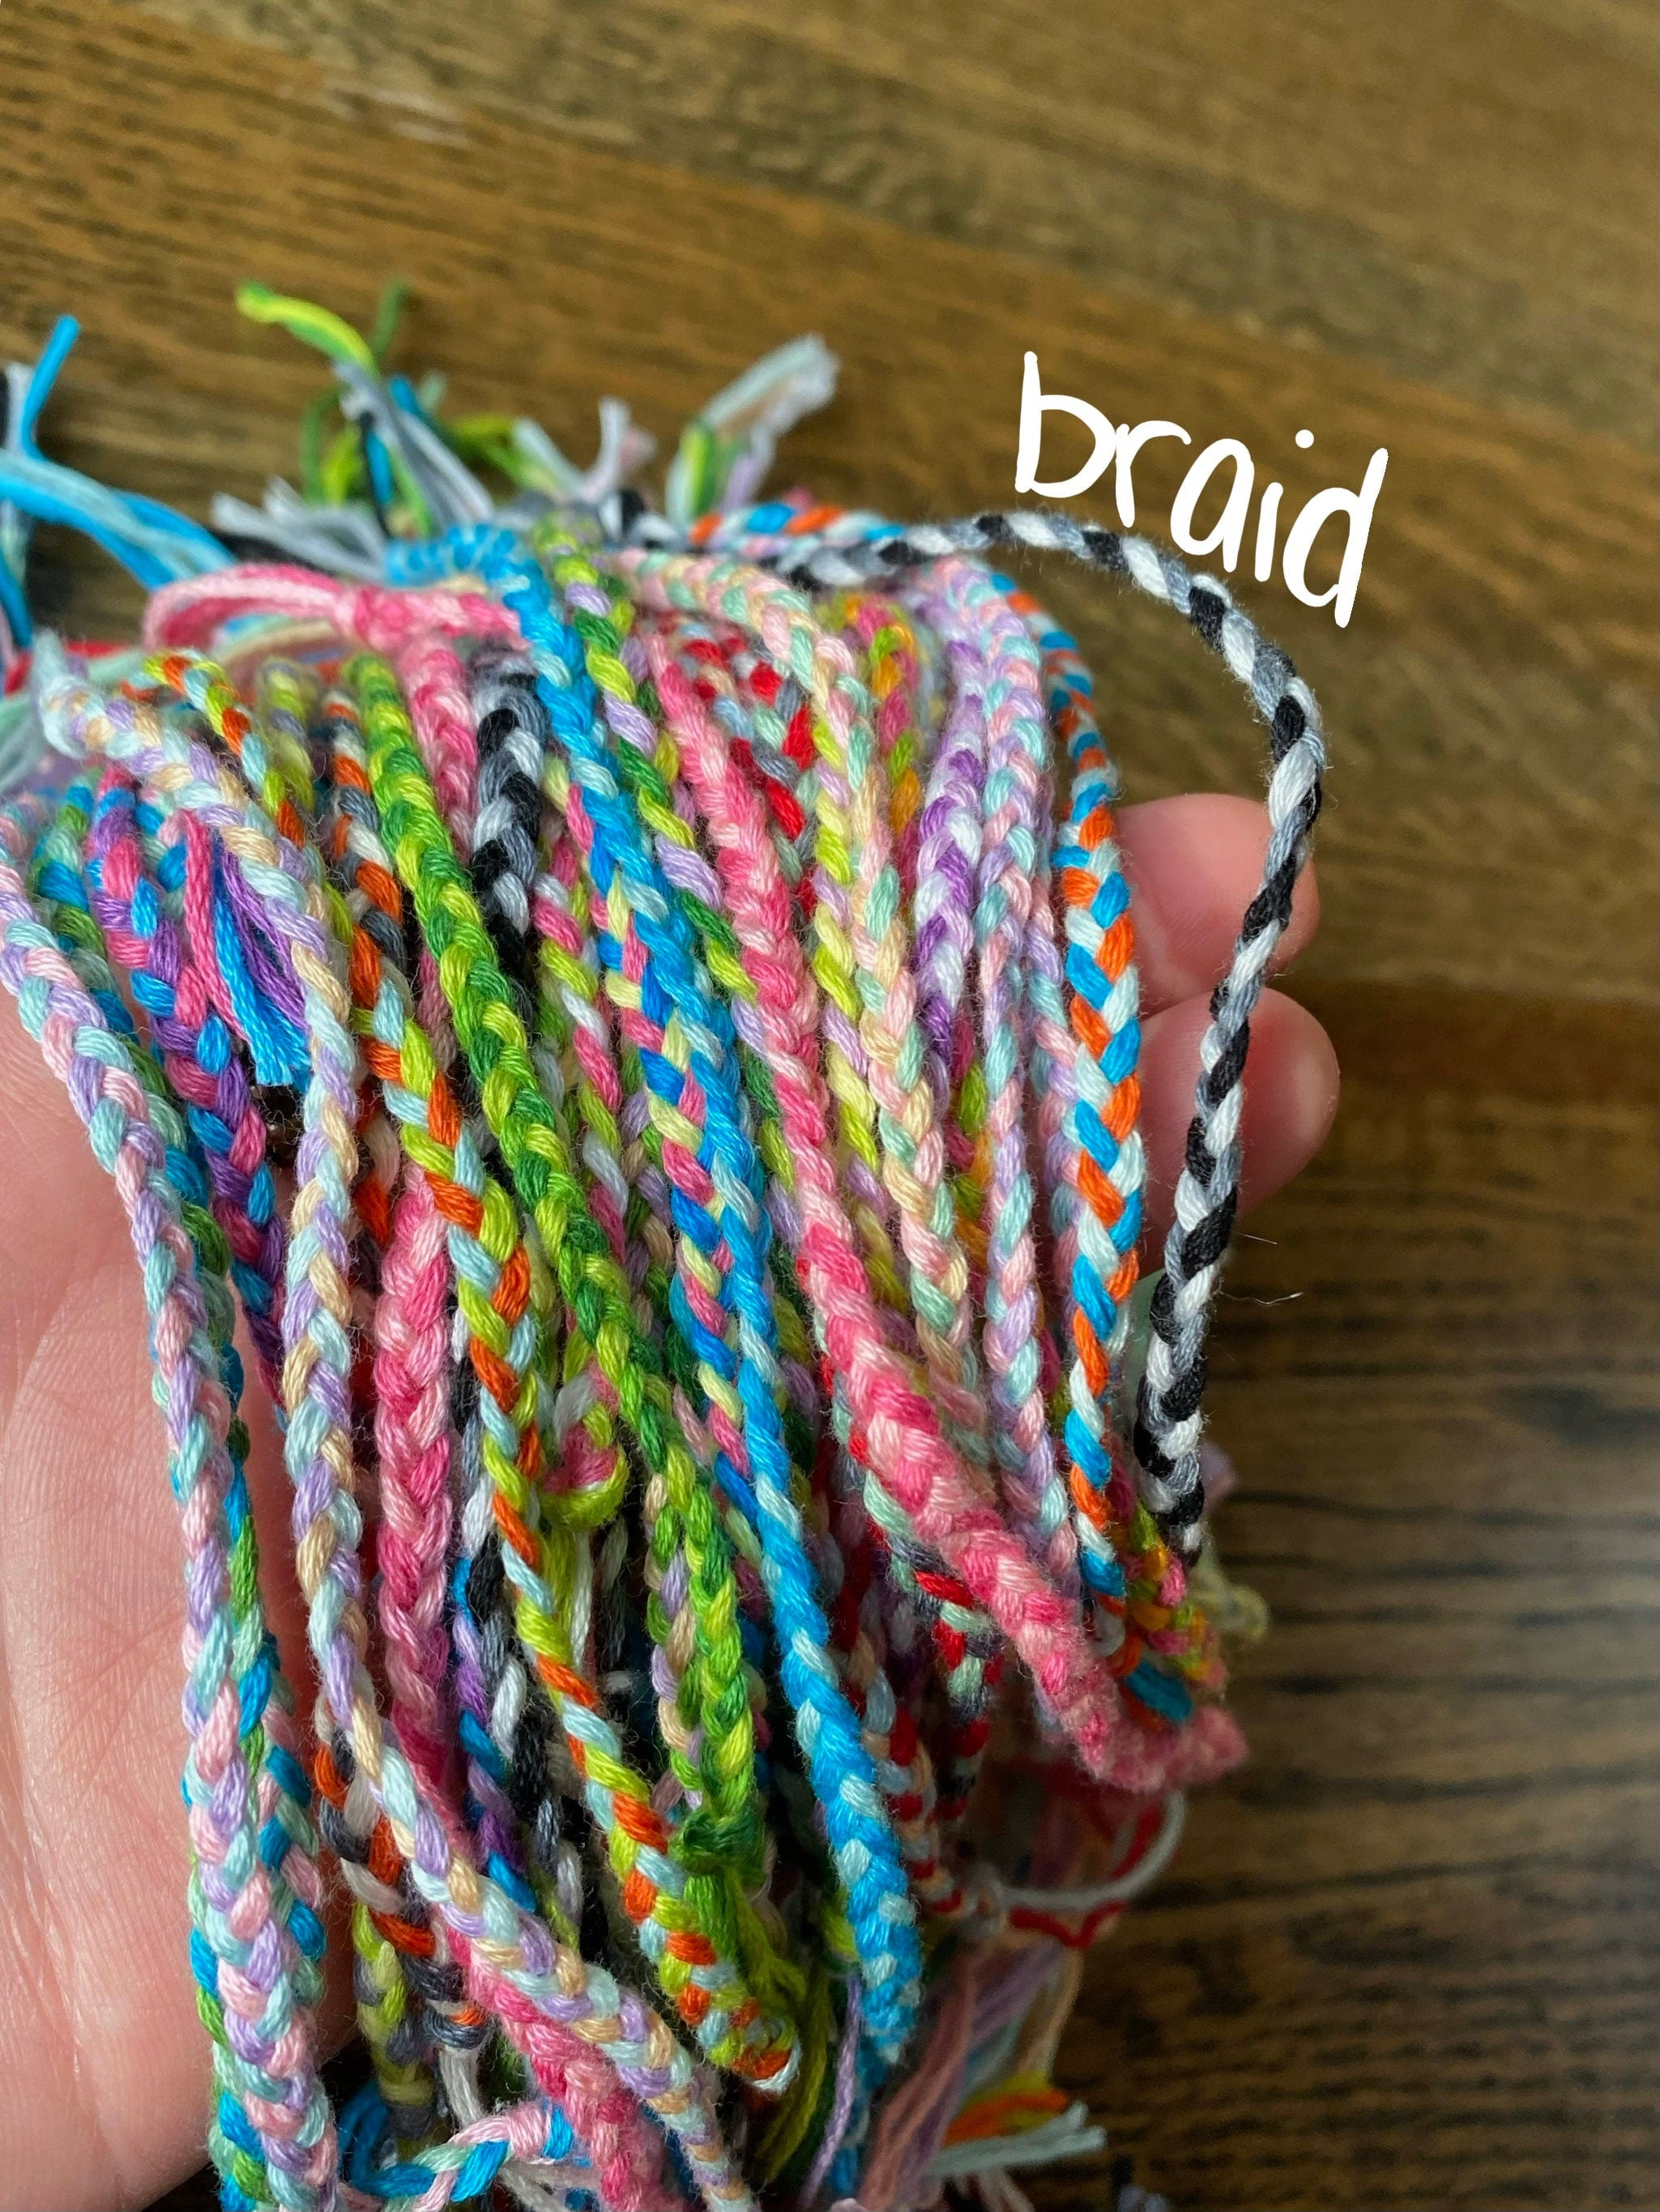 Adding Some Fun To Your Look With Braided Bracelets